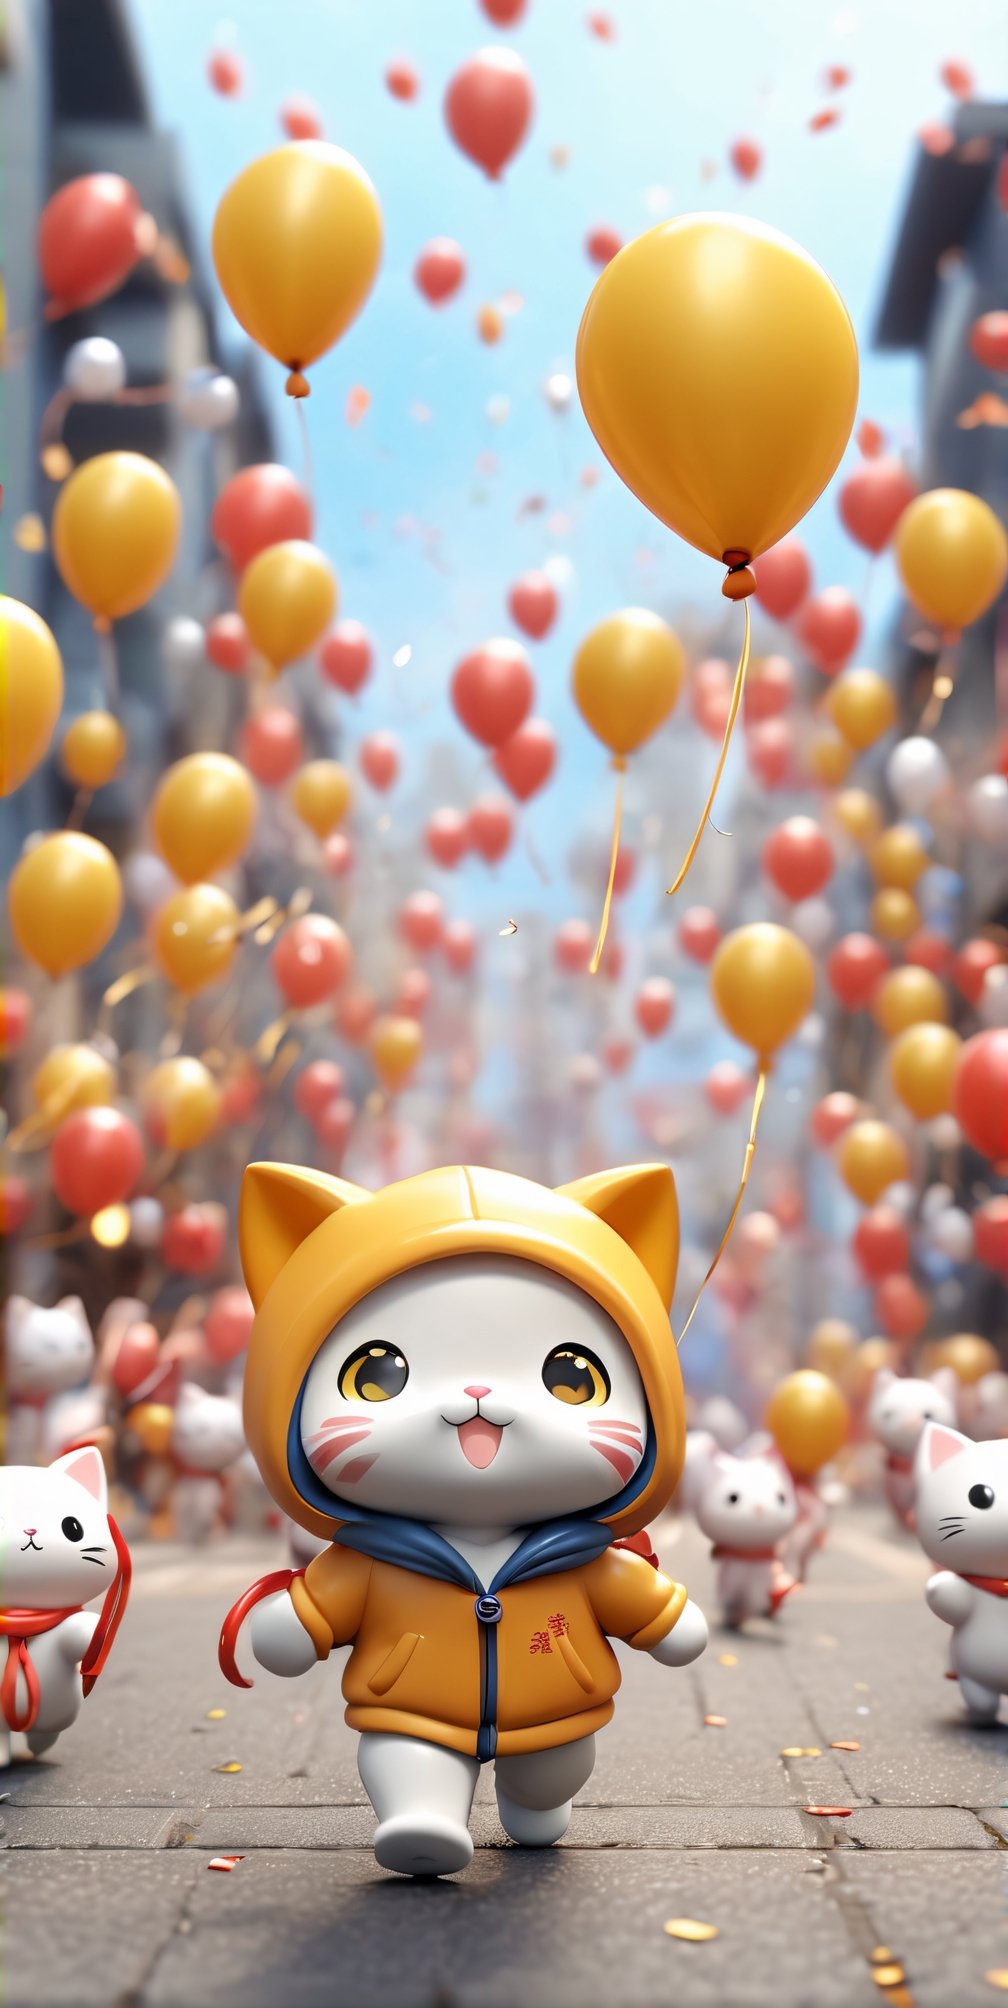 ((chibi style)), chibi cat in hoodie walking on busy street, new year setting, balloon and firecrackers, dynamic angle, depth of field, detail XL, closeup shot, finetune,ghibli,make_3d